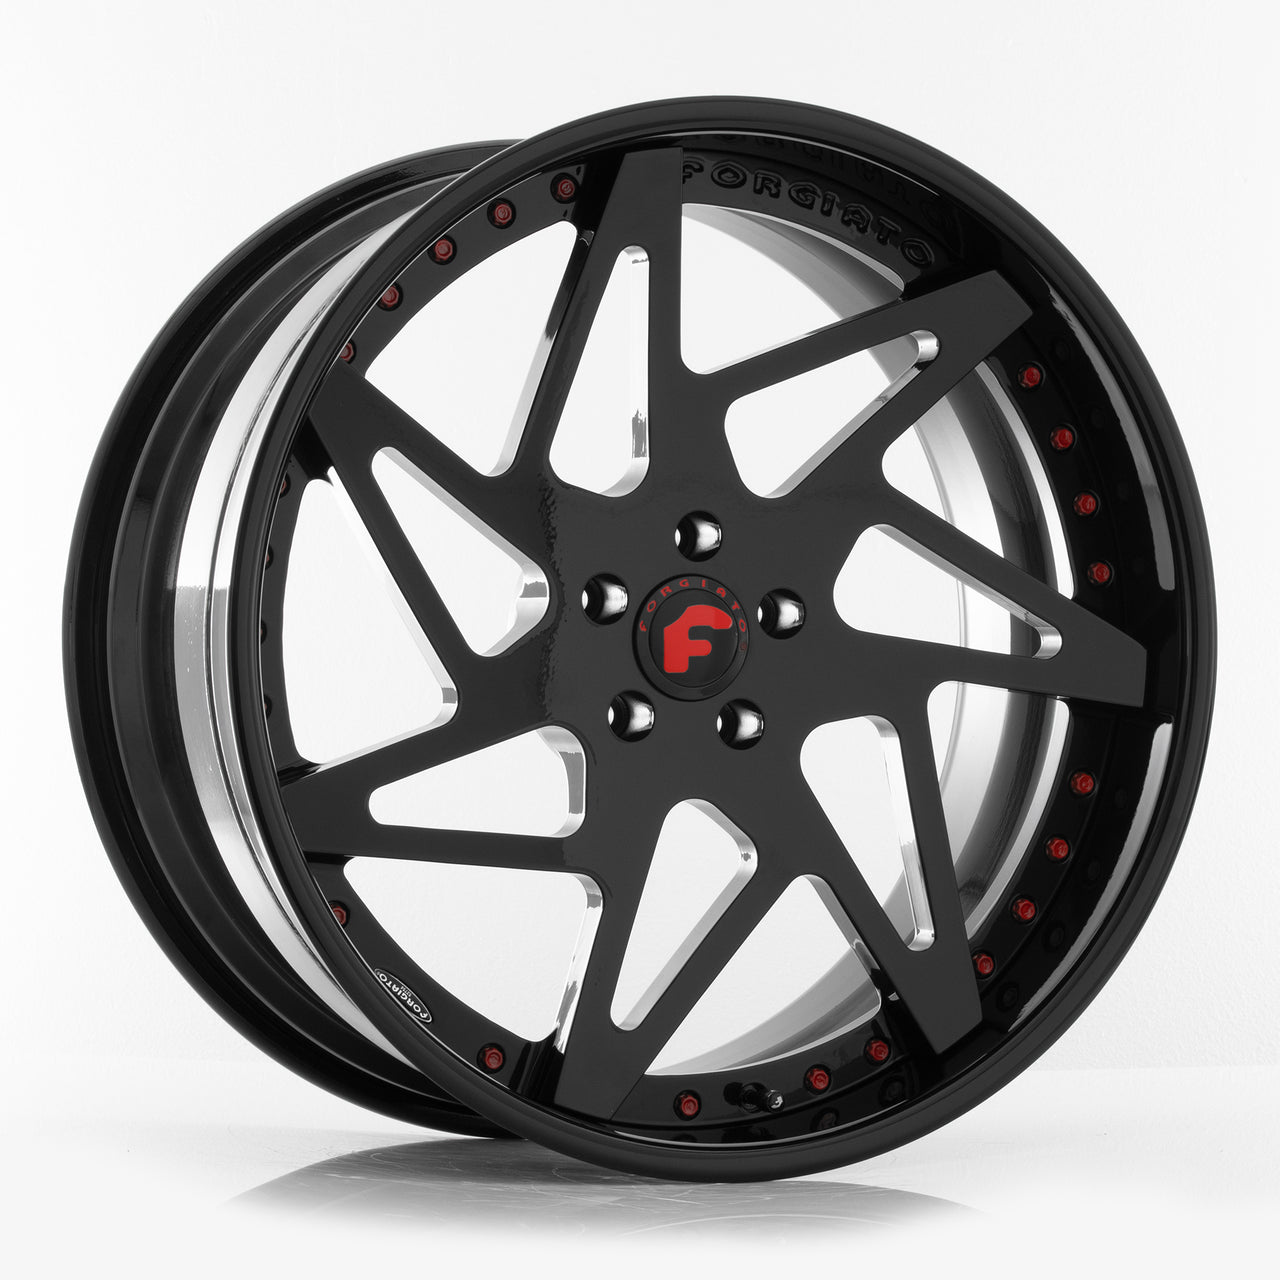 22" C Set of 4 Forgiato FINESTRO-ECL for SRT8 Charger (C Forging) Staggered - Wheels | Rims